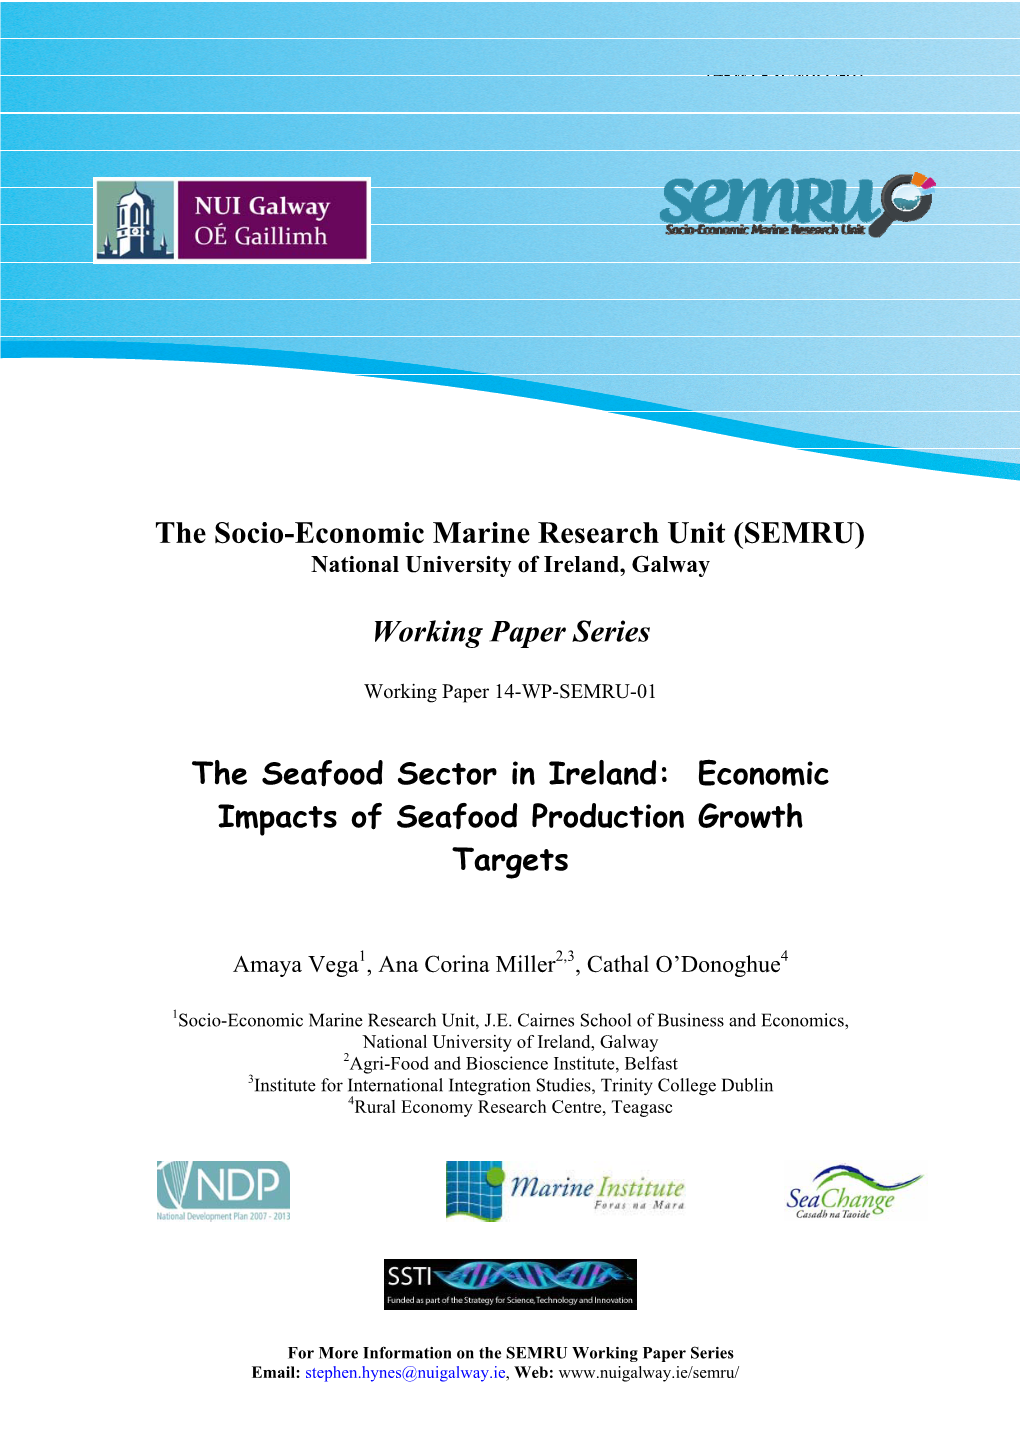 Economic Impacts of Seafood Production Growth Targets